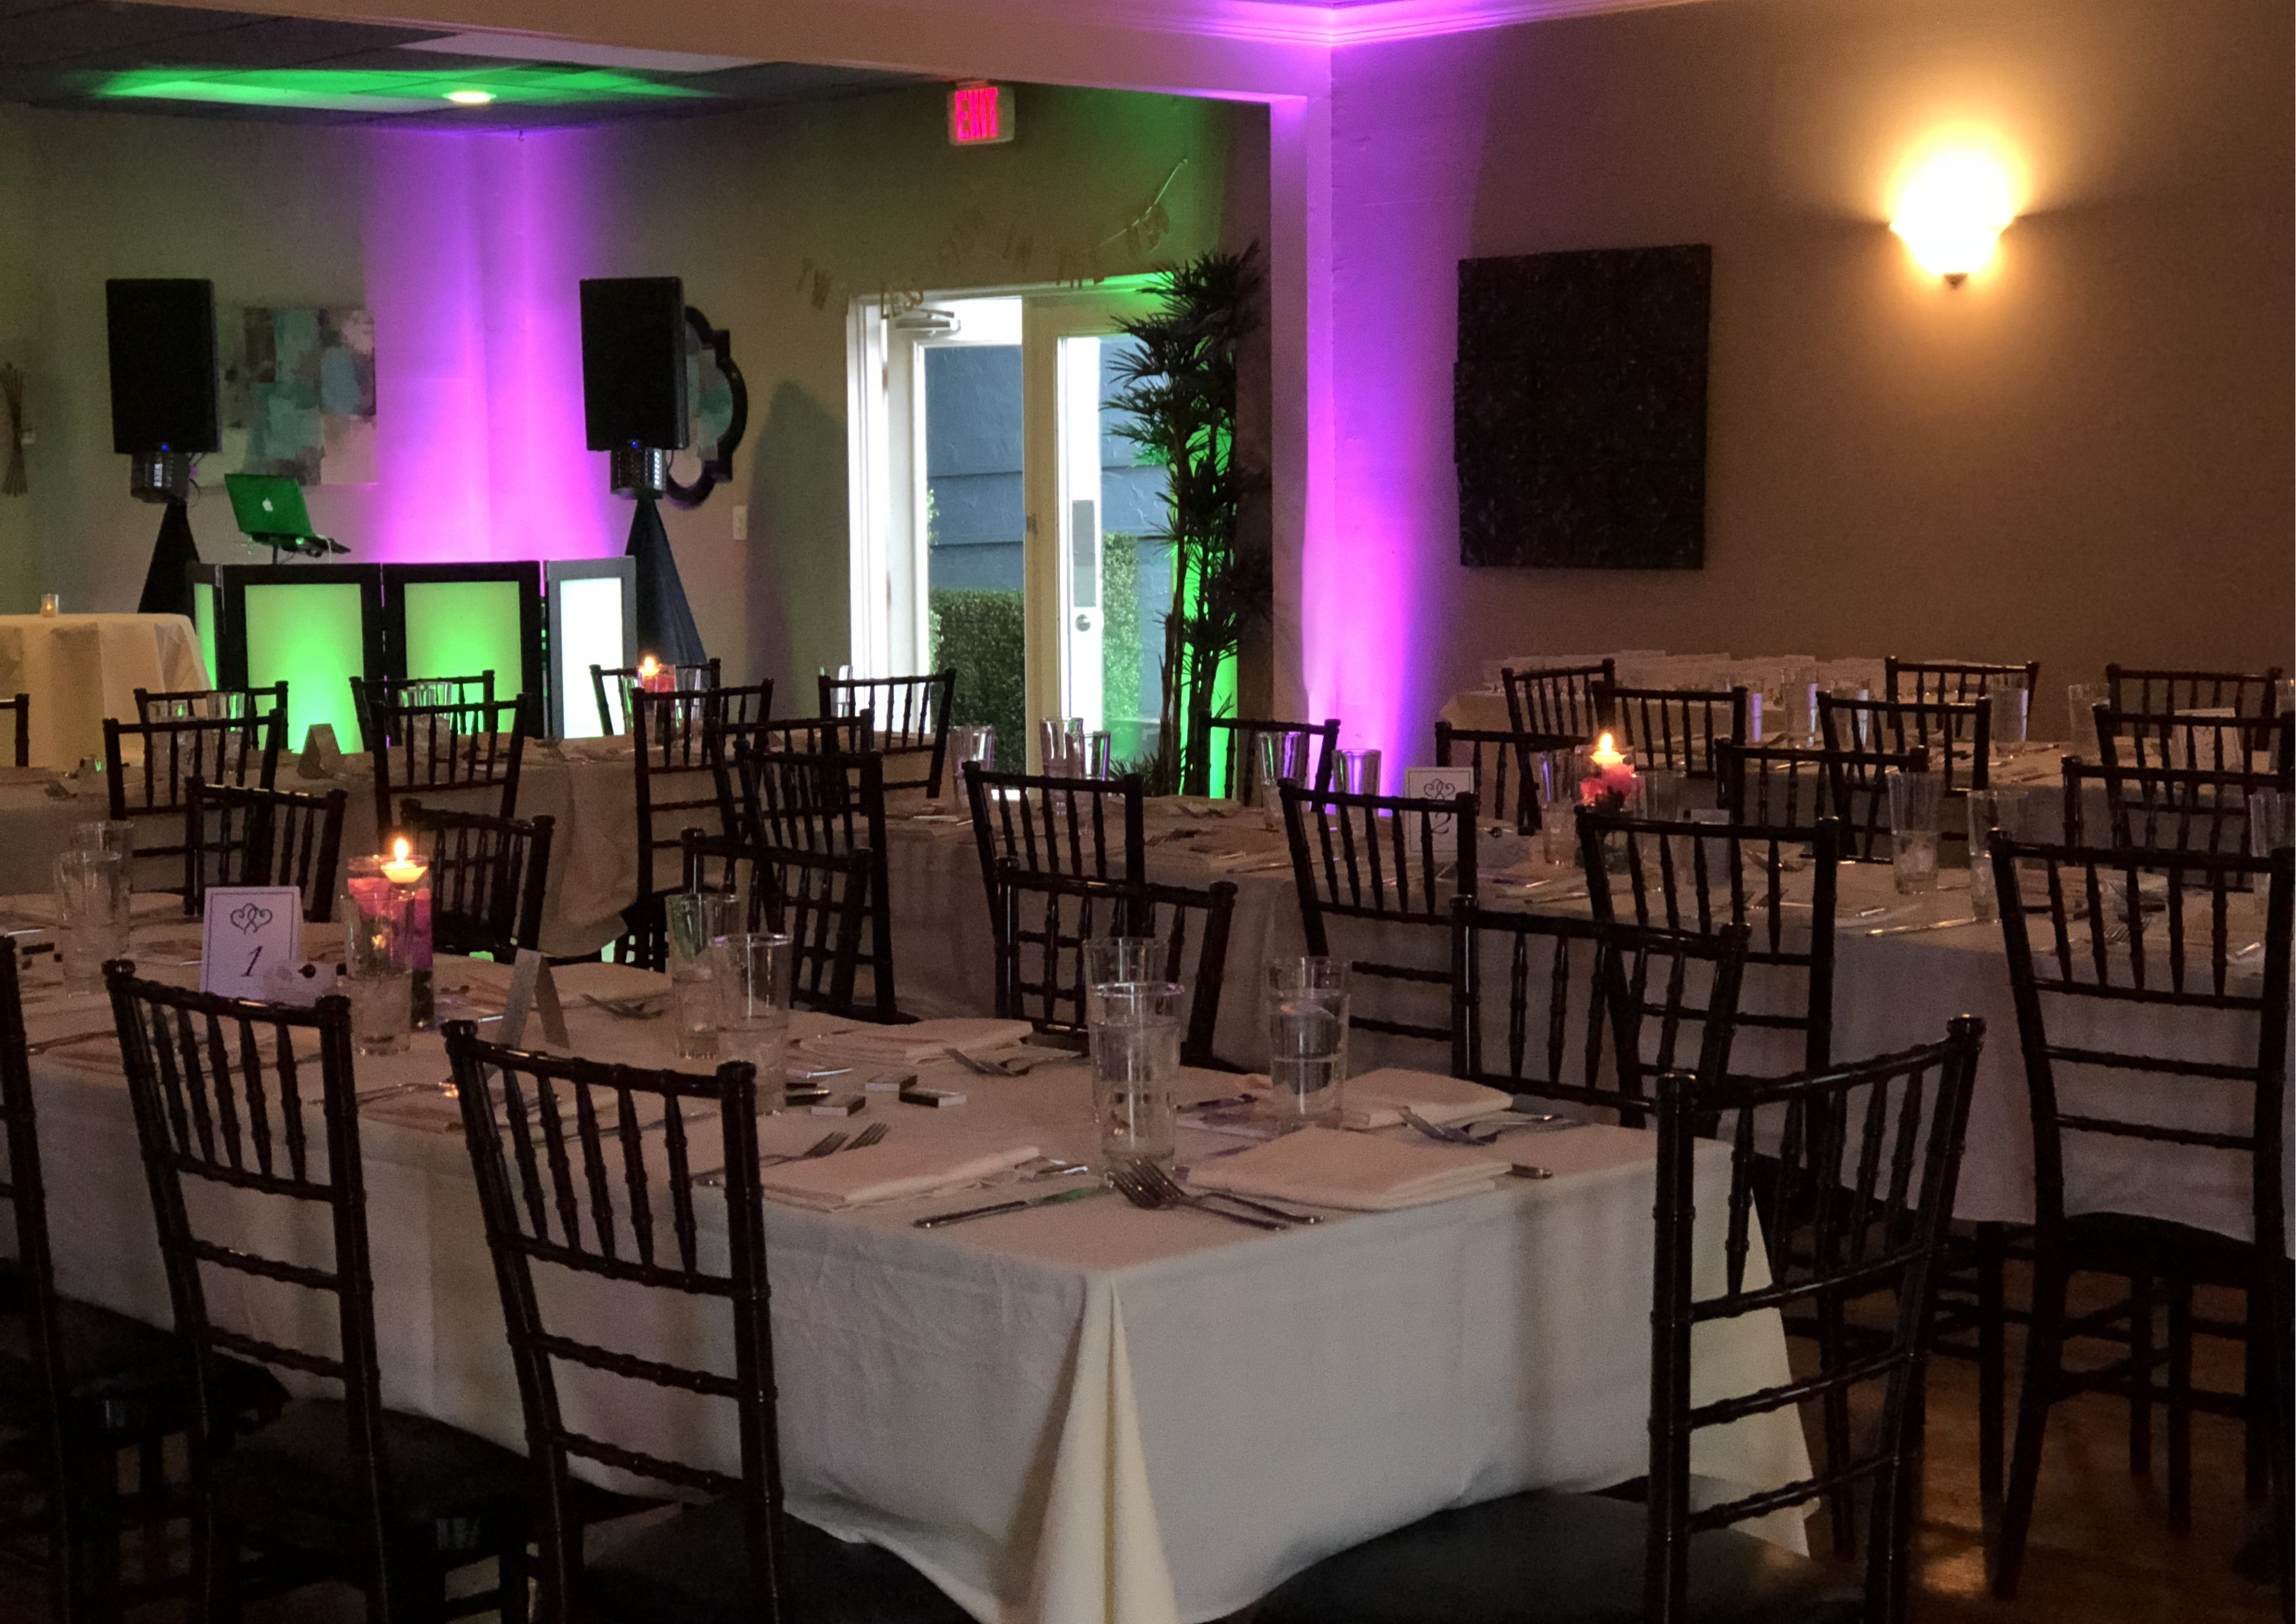 Small event hall with tables decorated for an event.  Colorful uplighting.